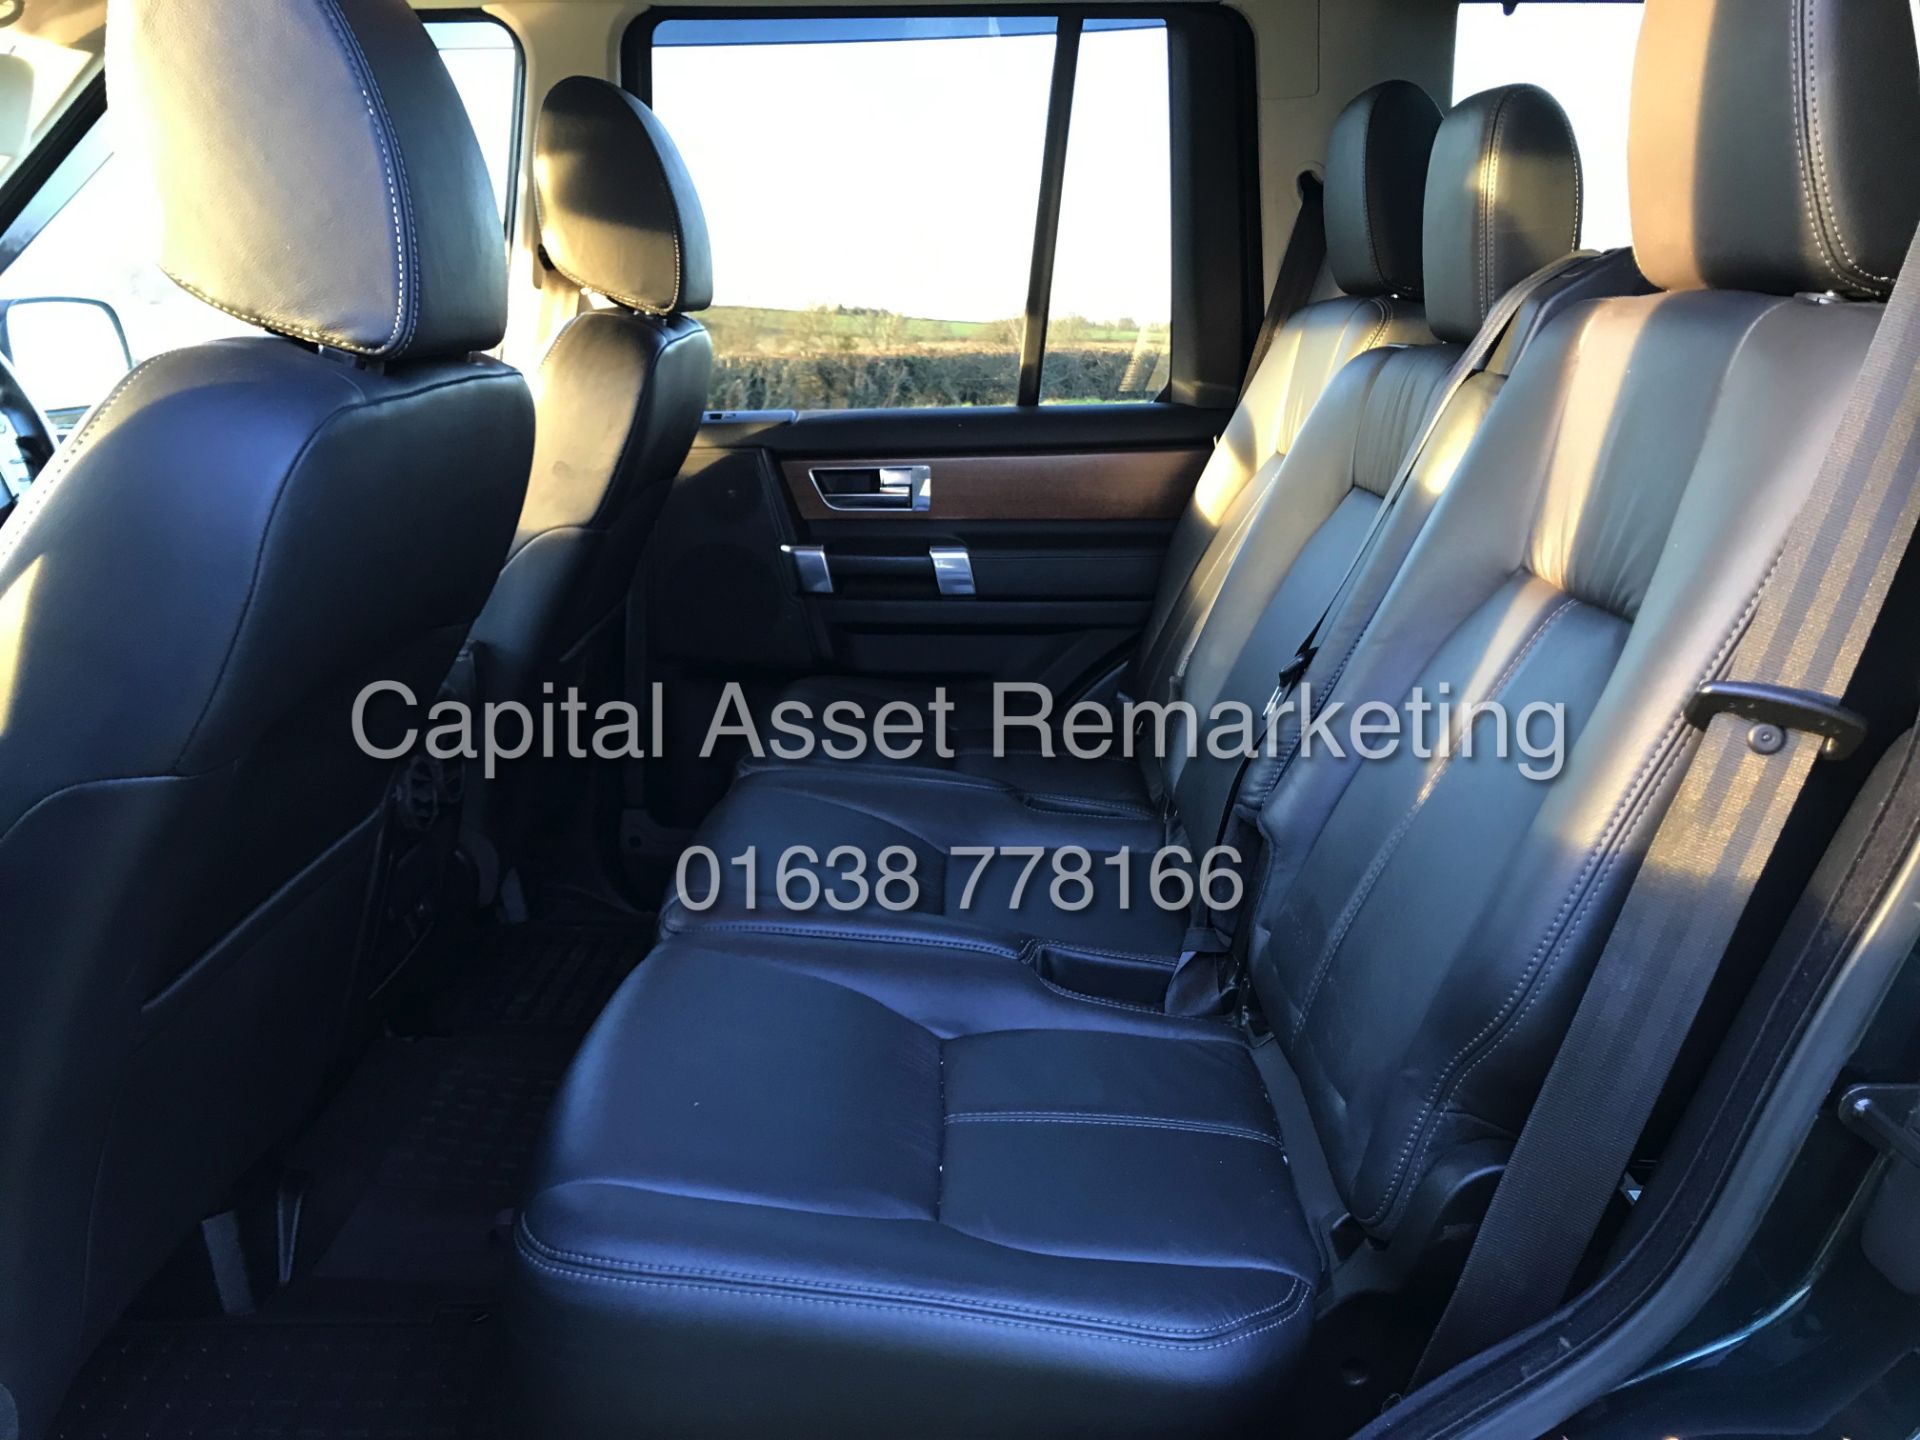 (ON SALE) LAND ROVER DISCOVERY 4 "HSE" 3.0 SDV6 AUTO (13 REG) 7 SEATER - TOP SPEC - SAT NAV -LEATHER - Image 31 of 31